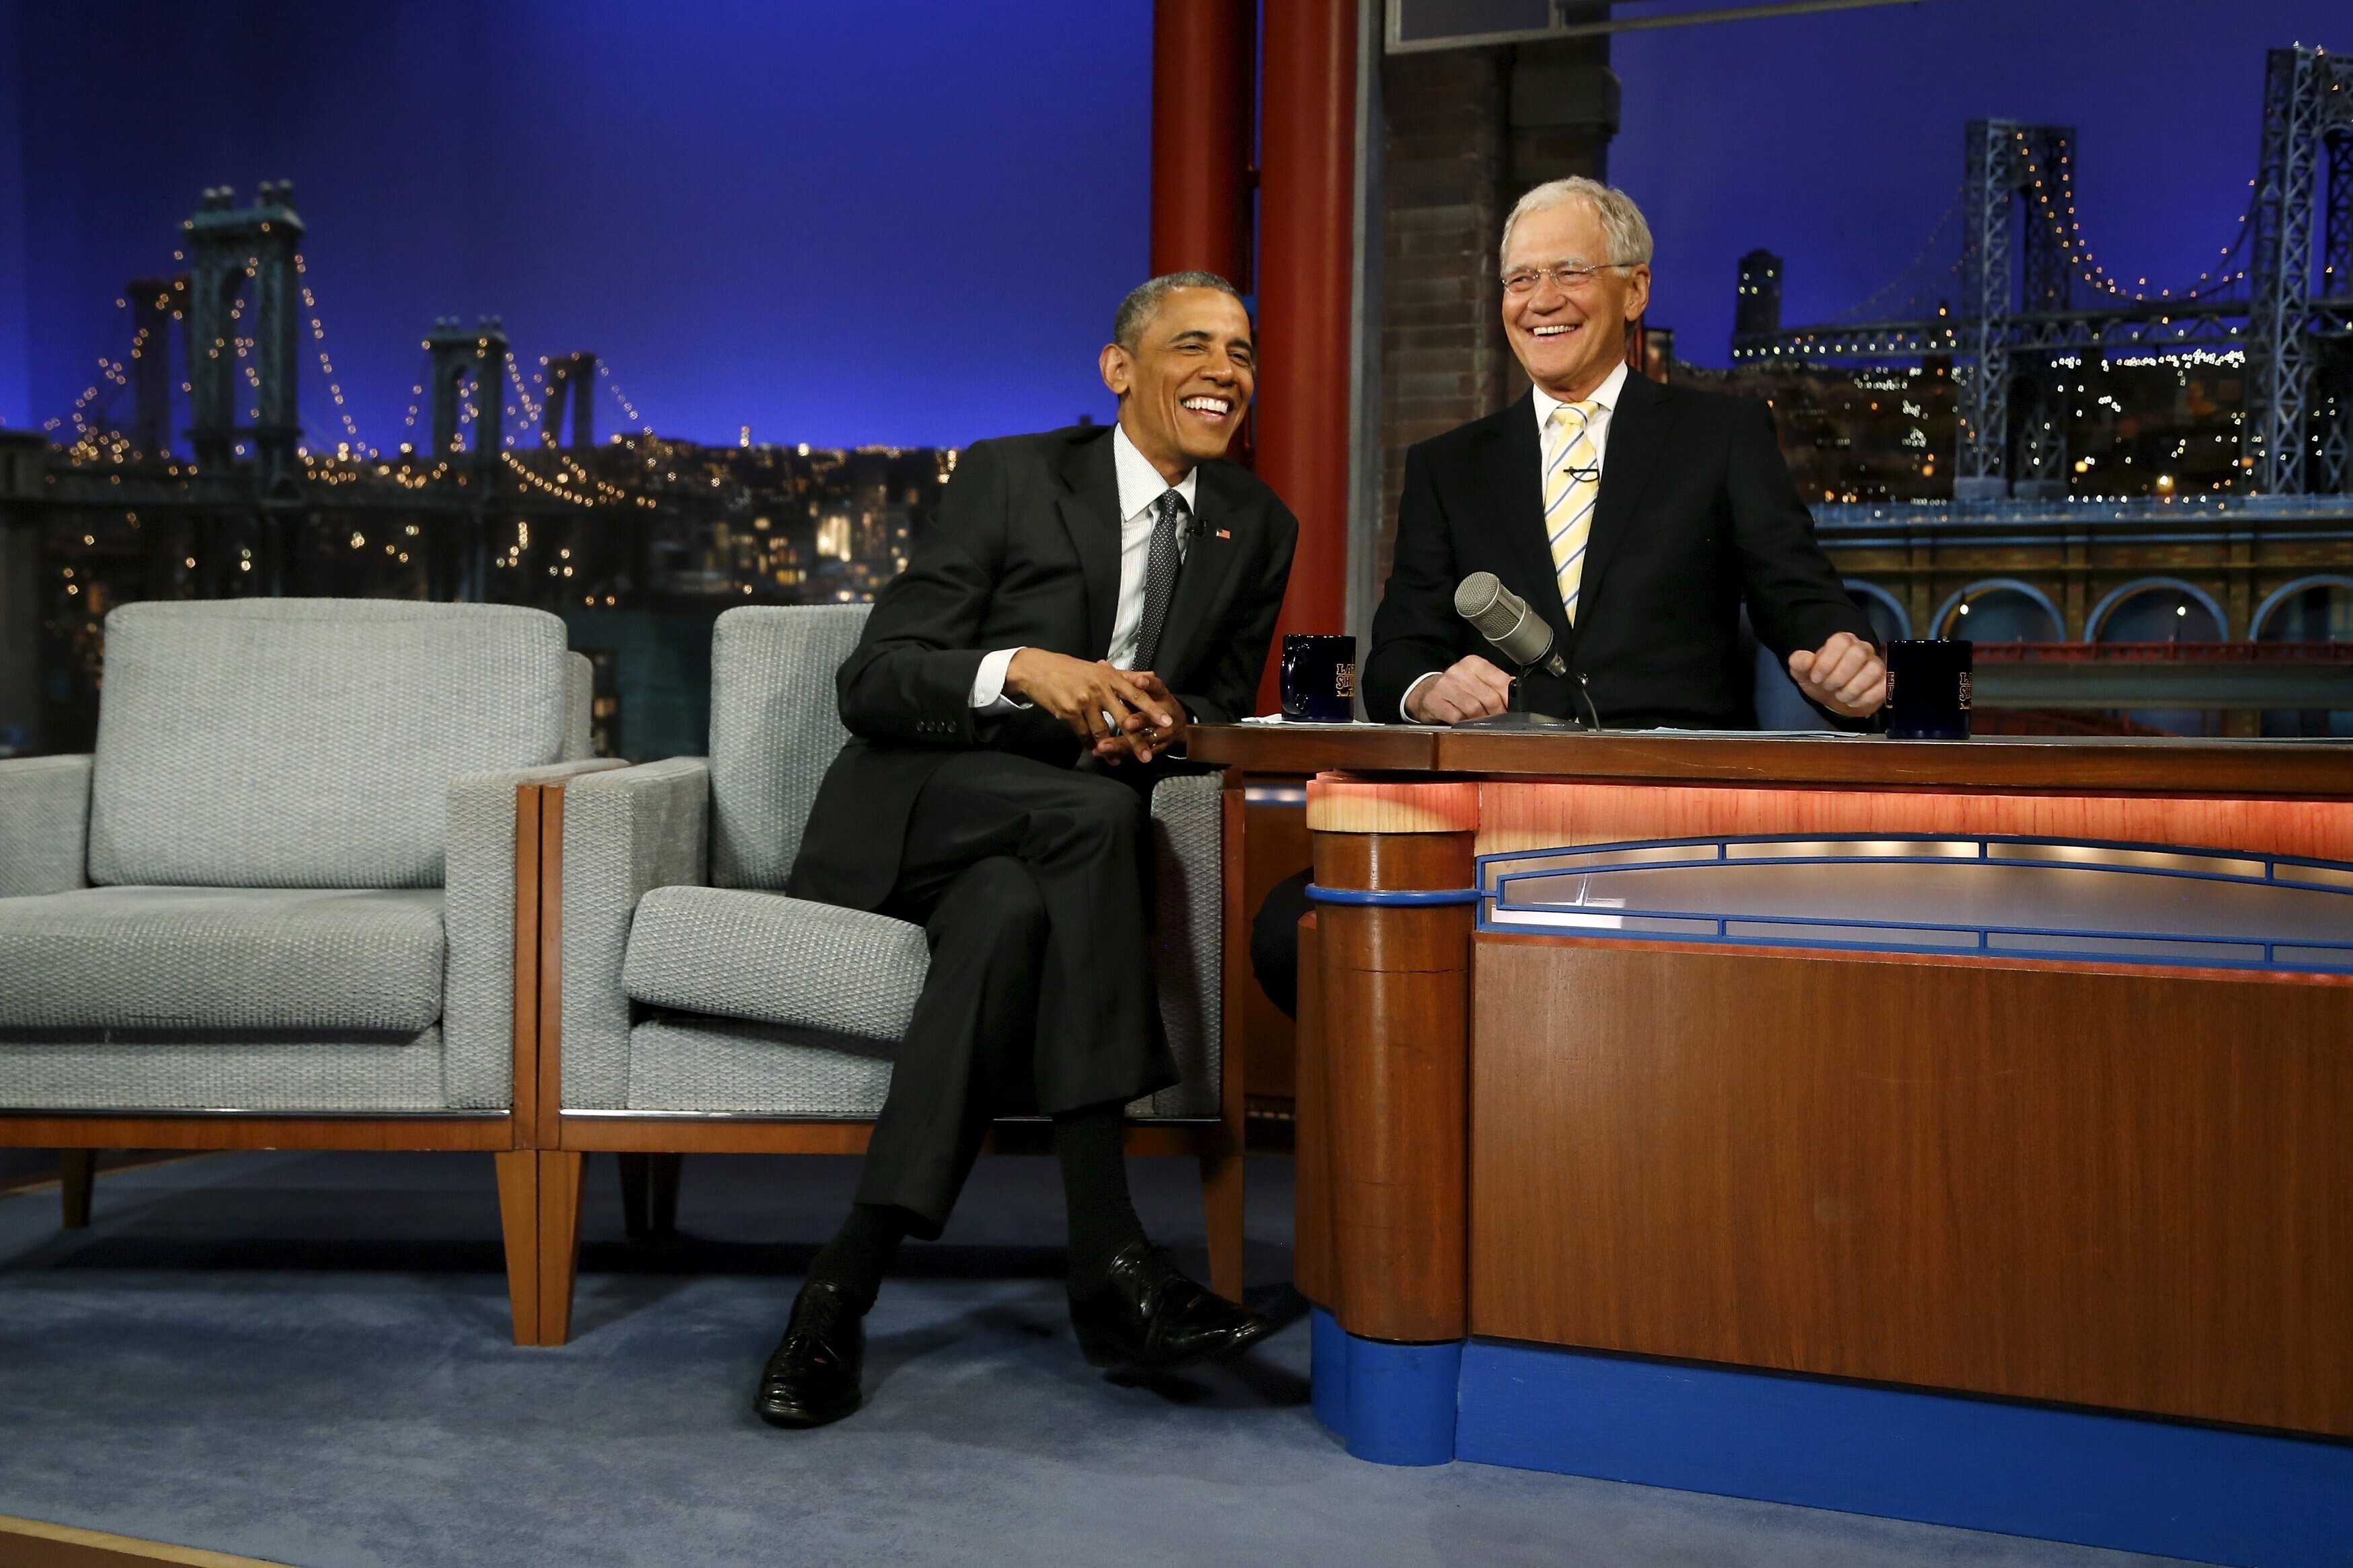 David Letterman says goodbye to the ‘Late show’